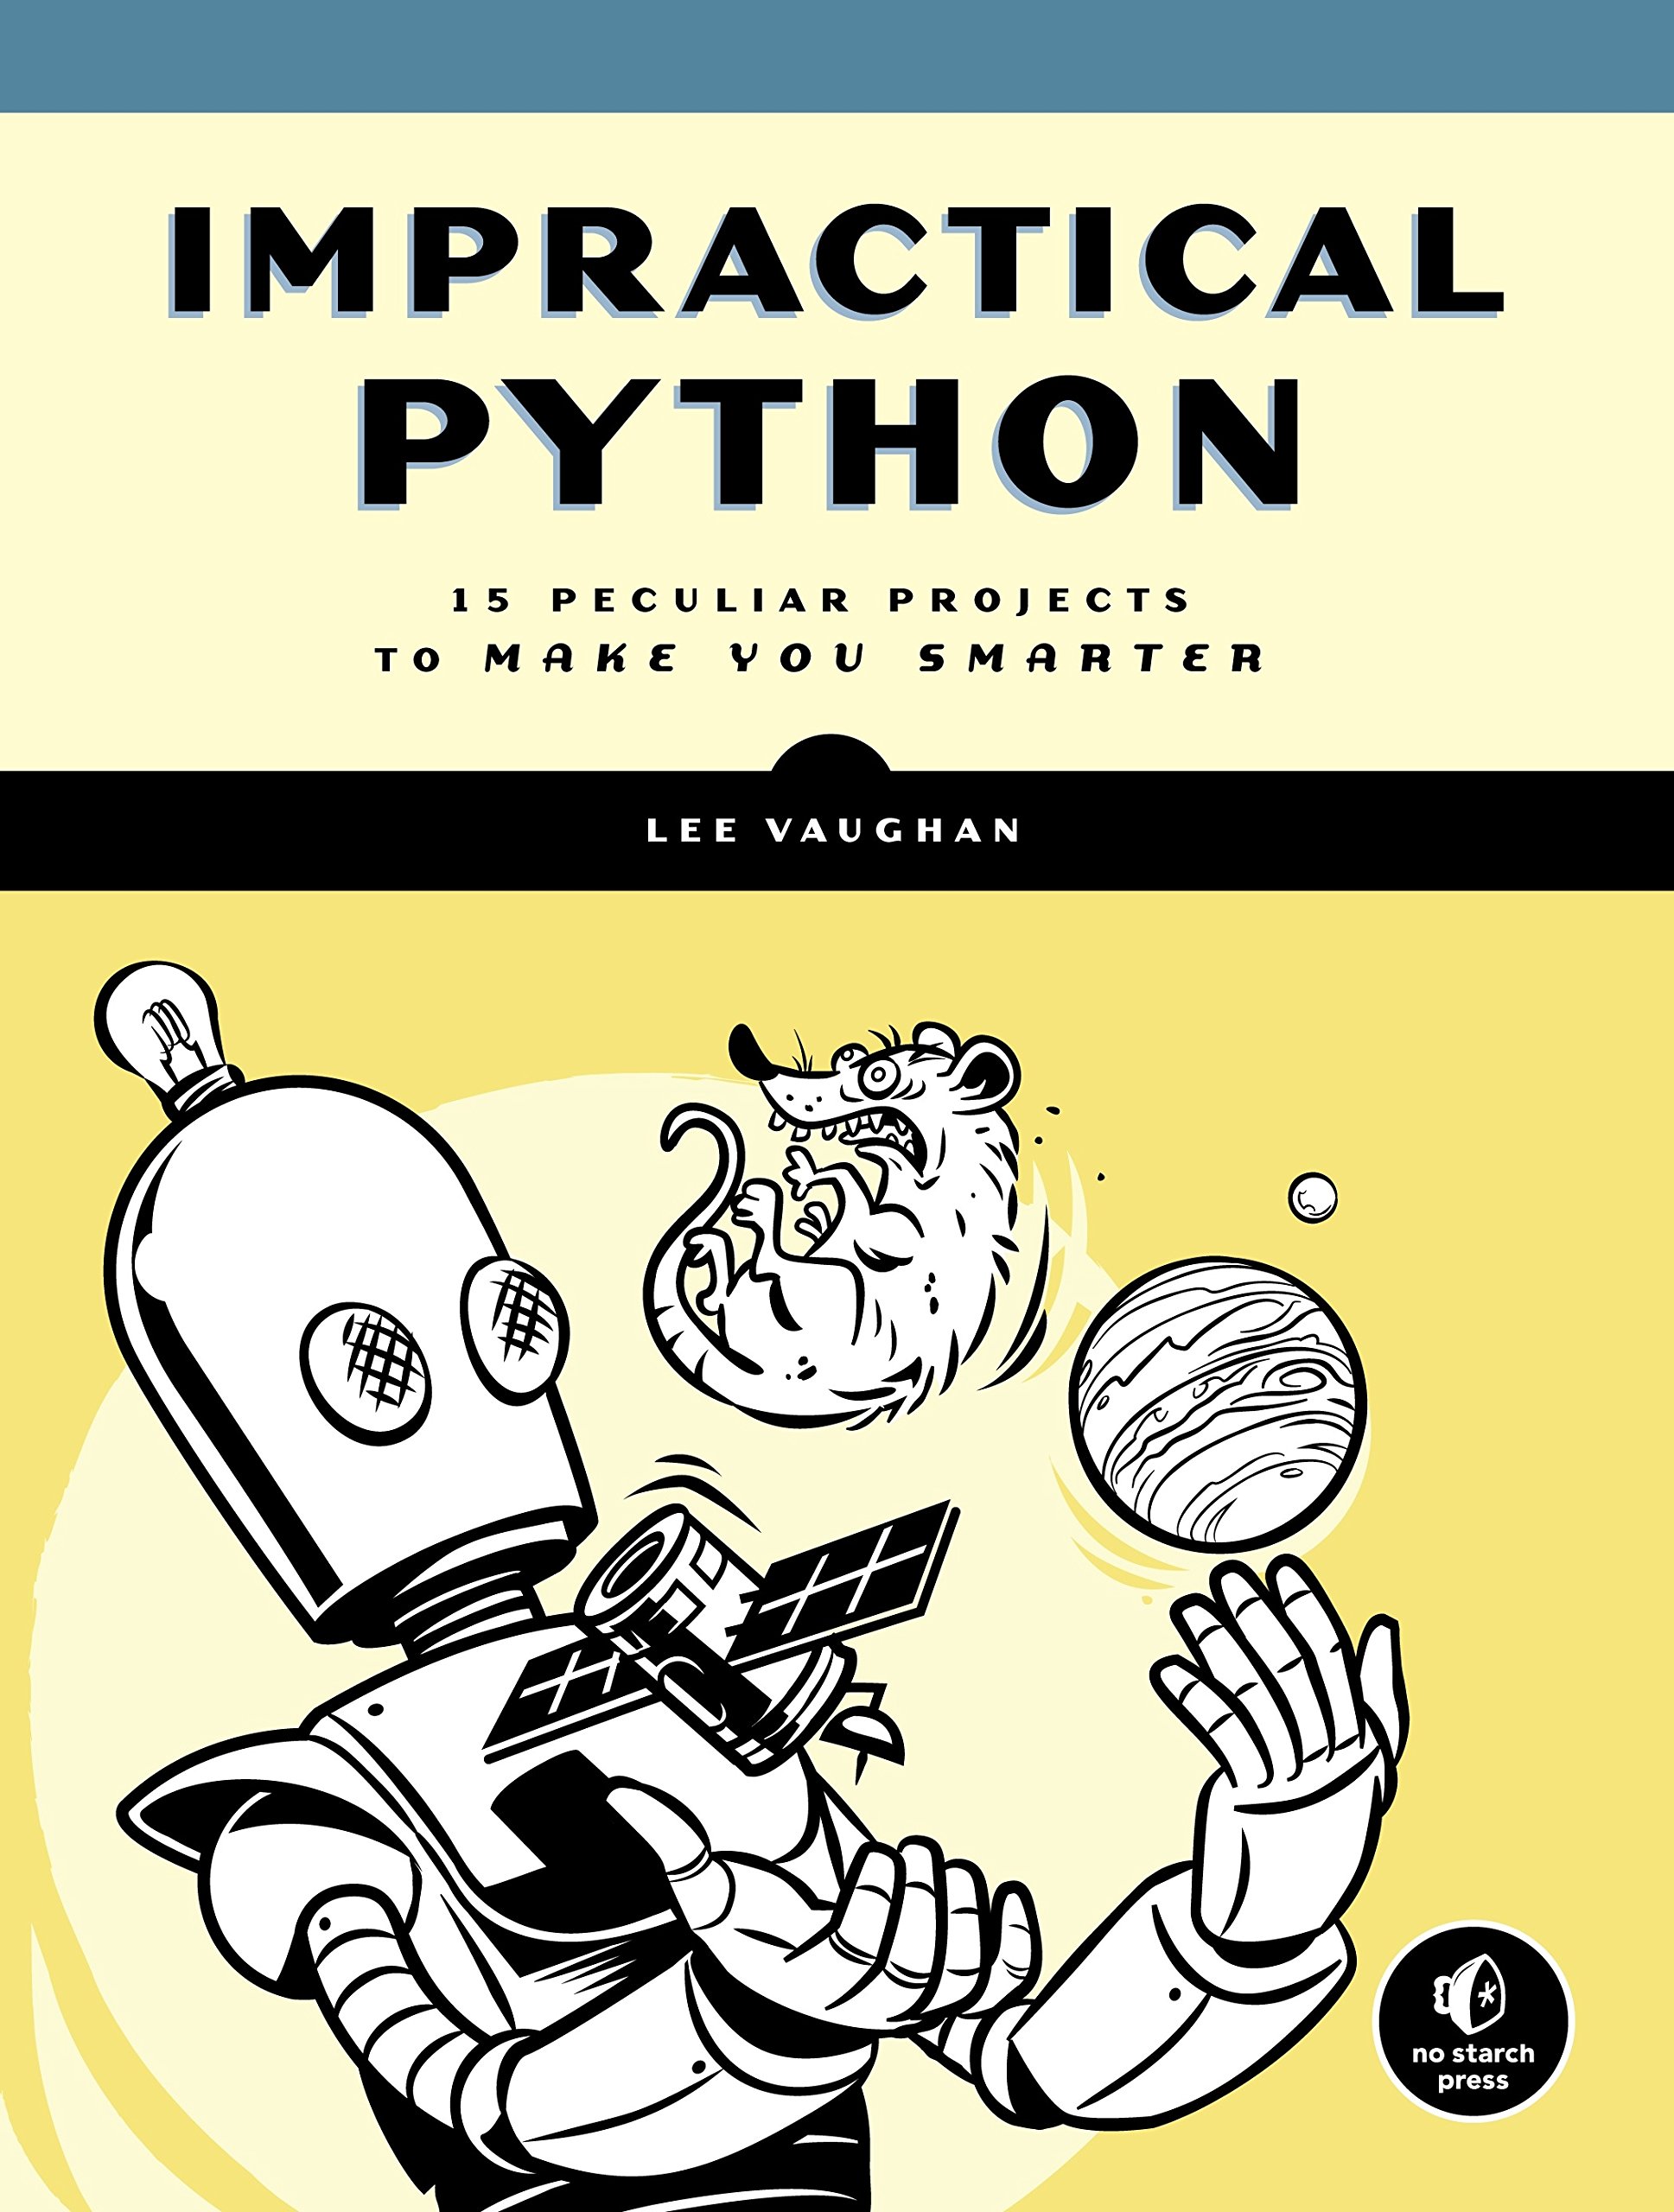 Impractical Python Projects: Playful Programming Activities to Make You Smarter